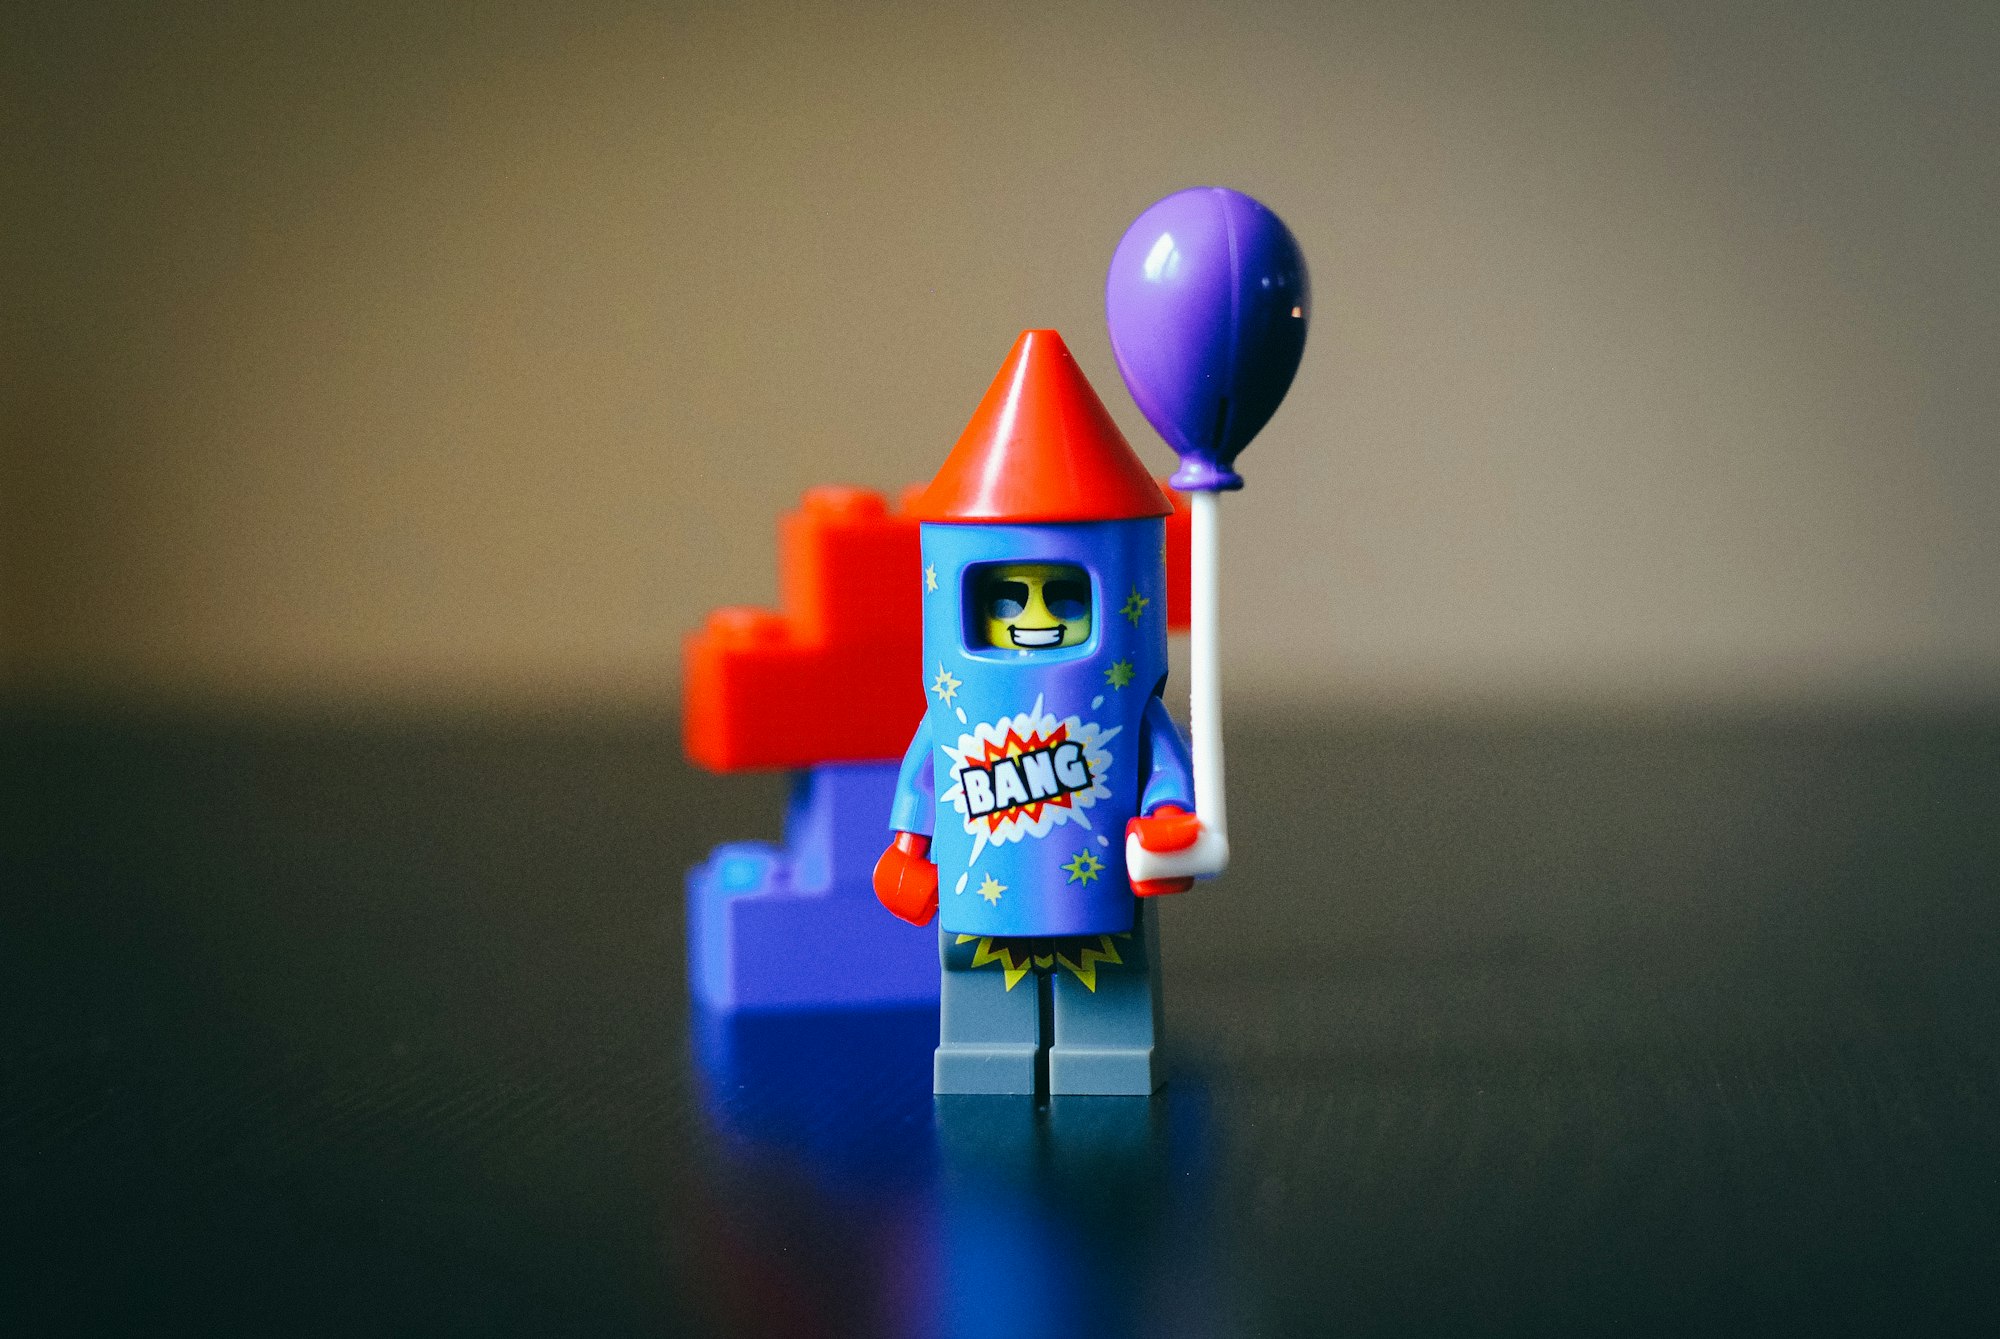 A LEGO minifigure, wearing a firework costume, which reads "BANG".